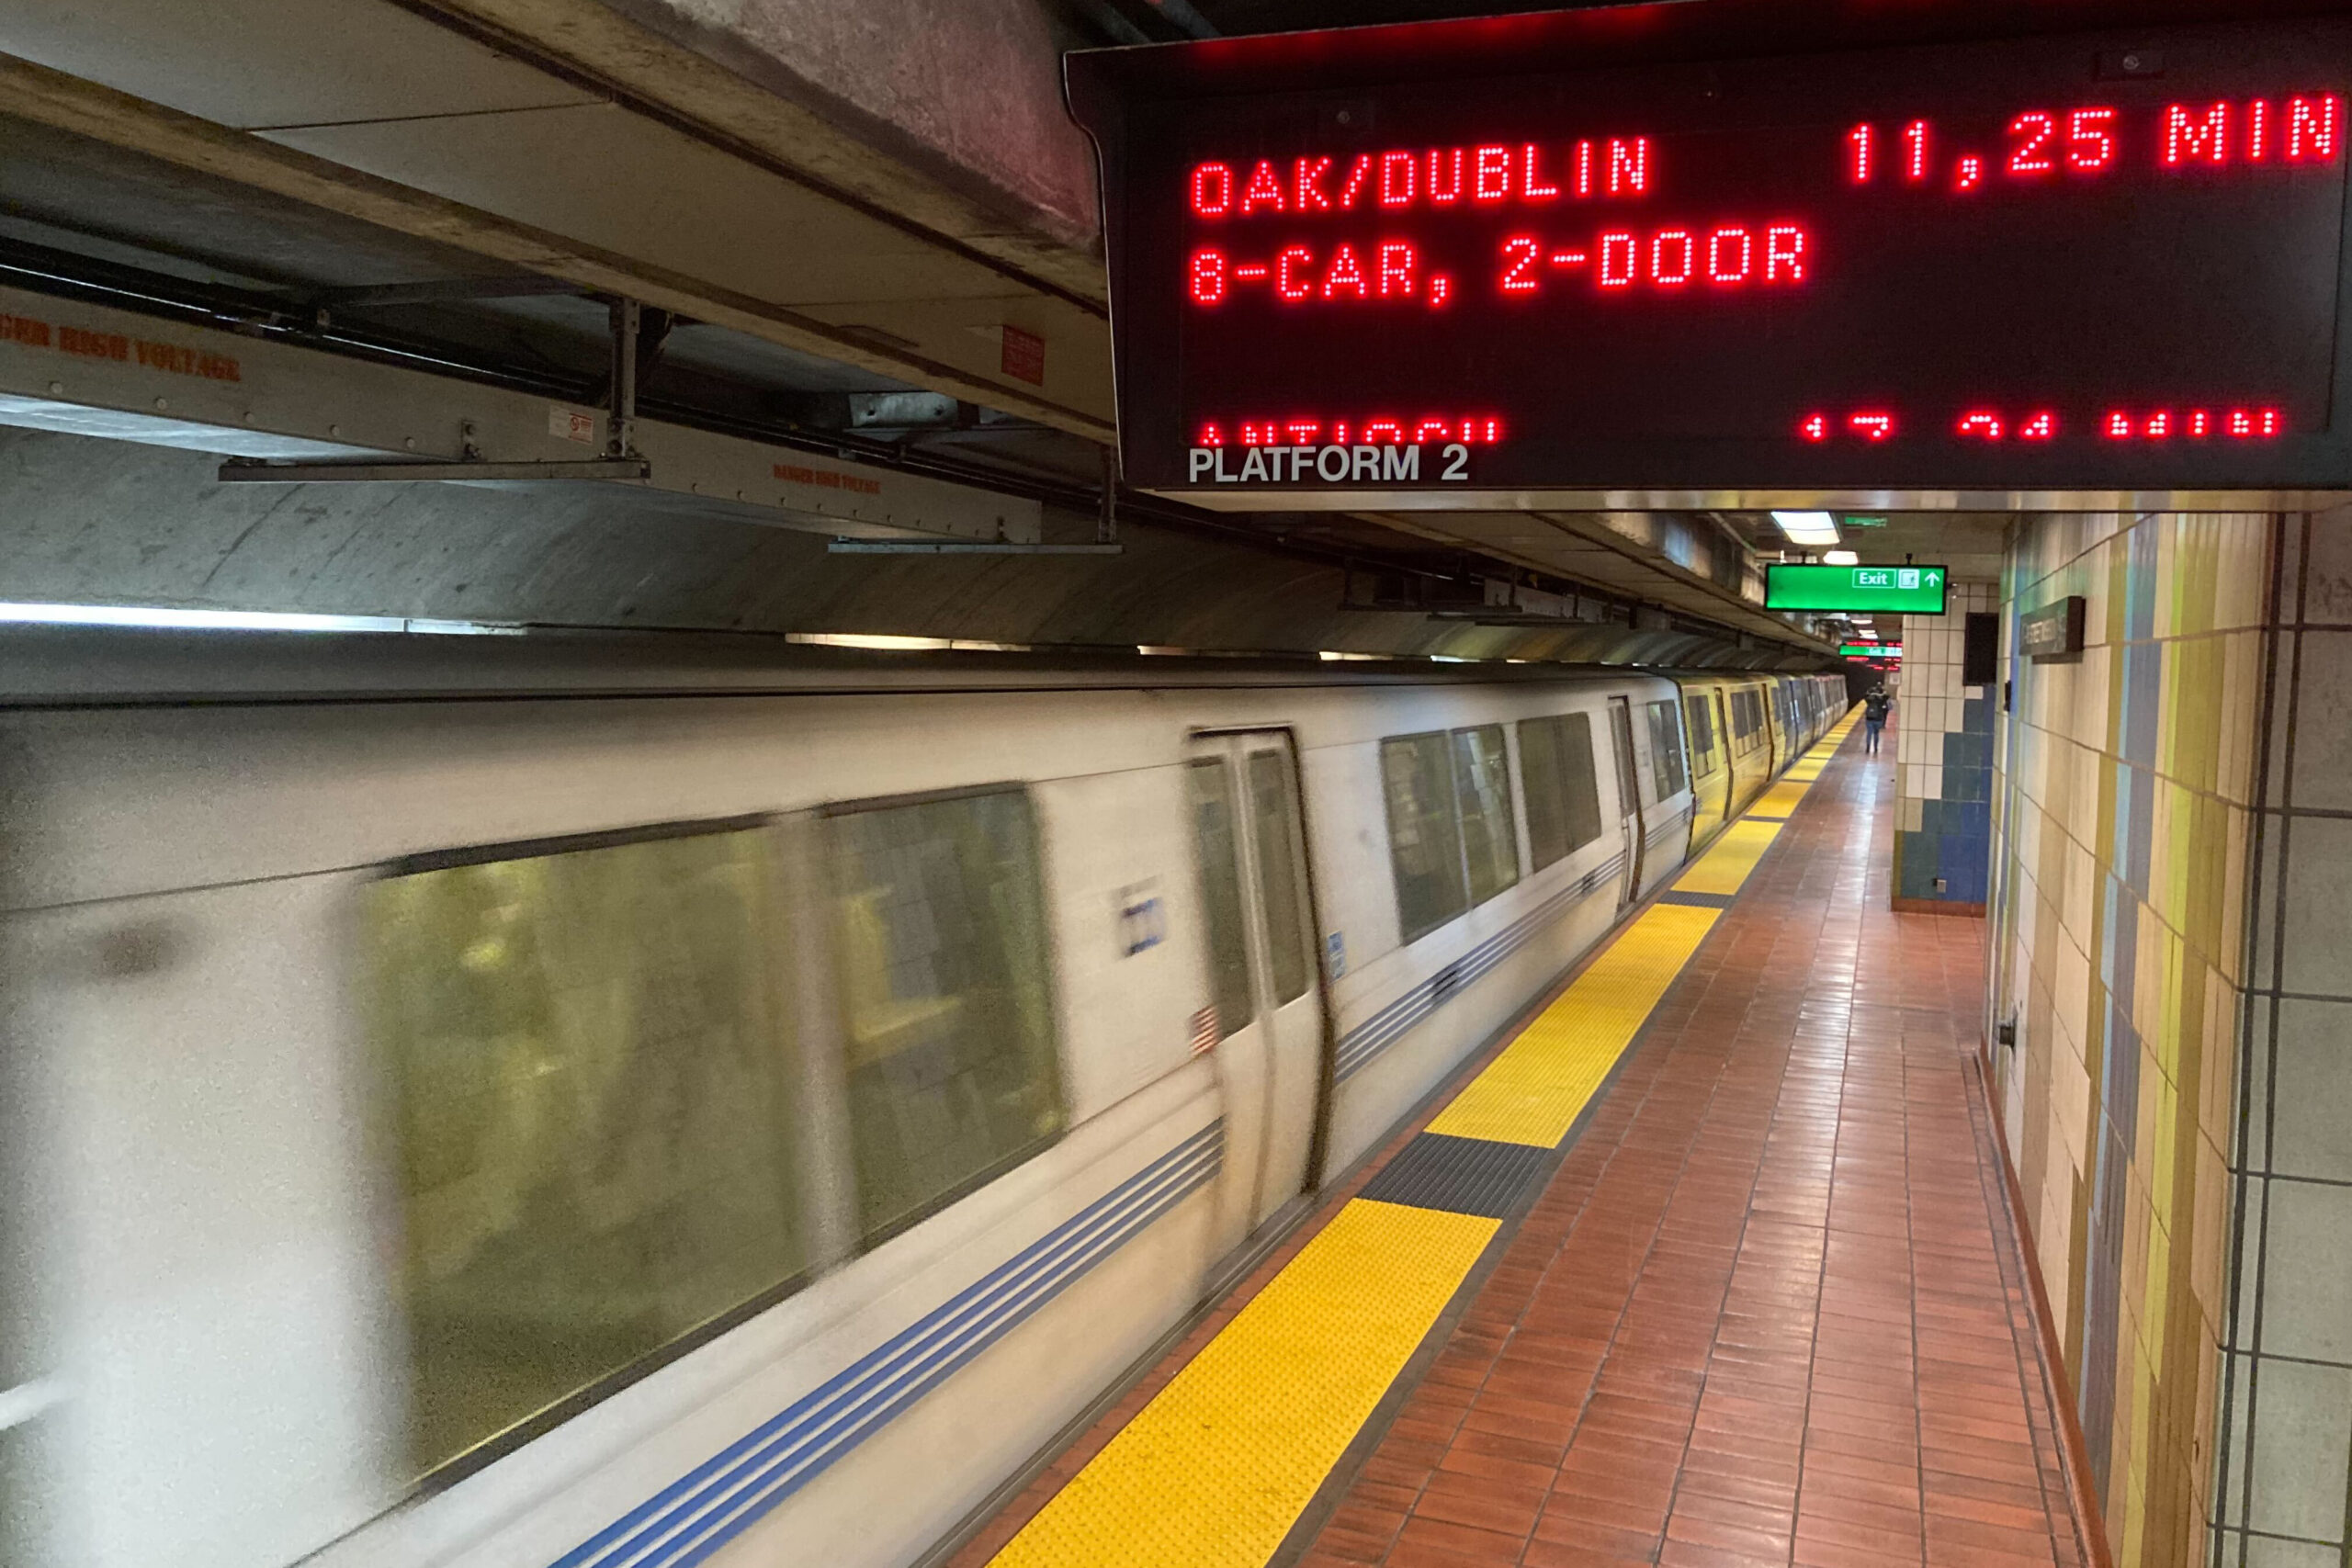 BART trains at the 16th Street/Mission Street station in San Francisco, Calif. on Thursday, Feb. 23, 2023. LED displays indicated that BART trains were delayed due to rain and inclement weather. | RJ Mickelson/The Standard